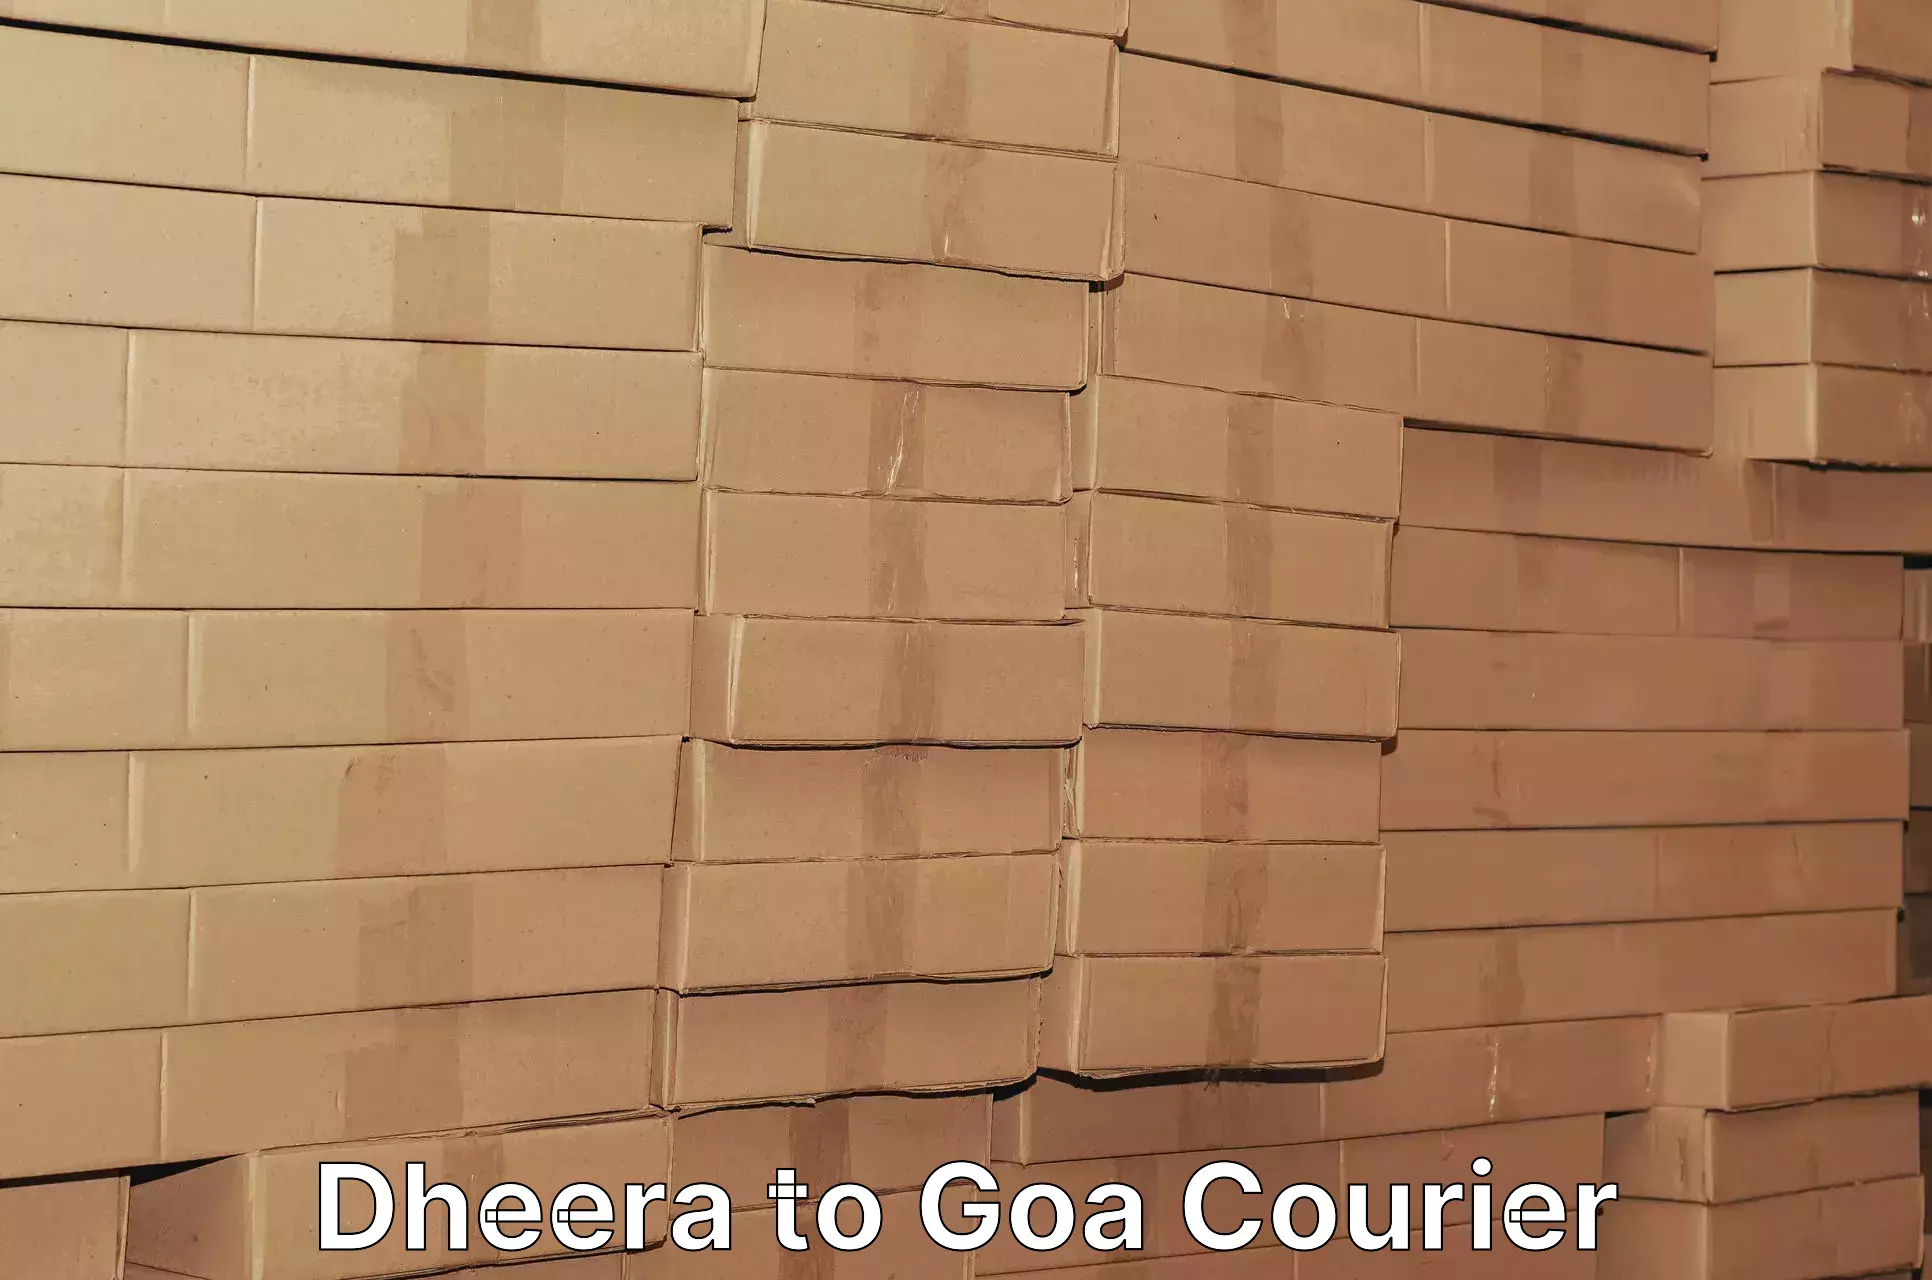 Overnight delivery services Dheera to Goa